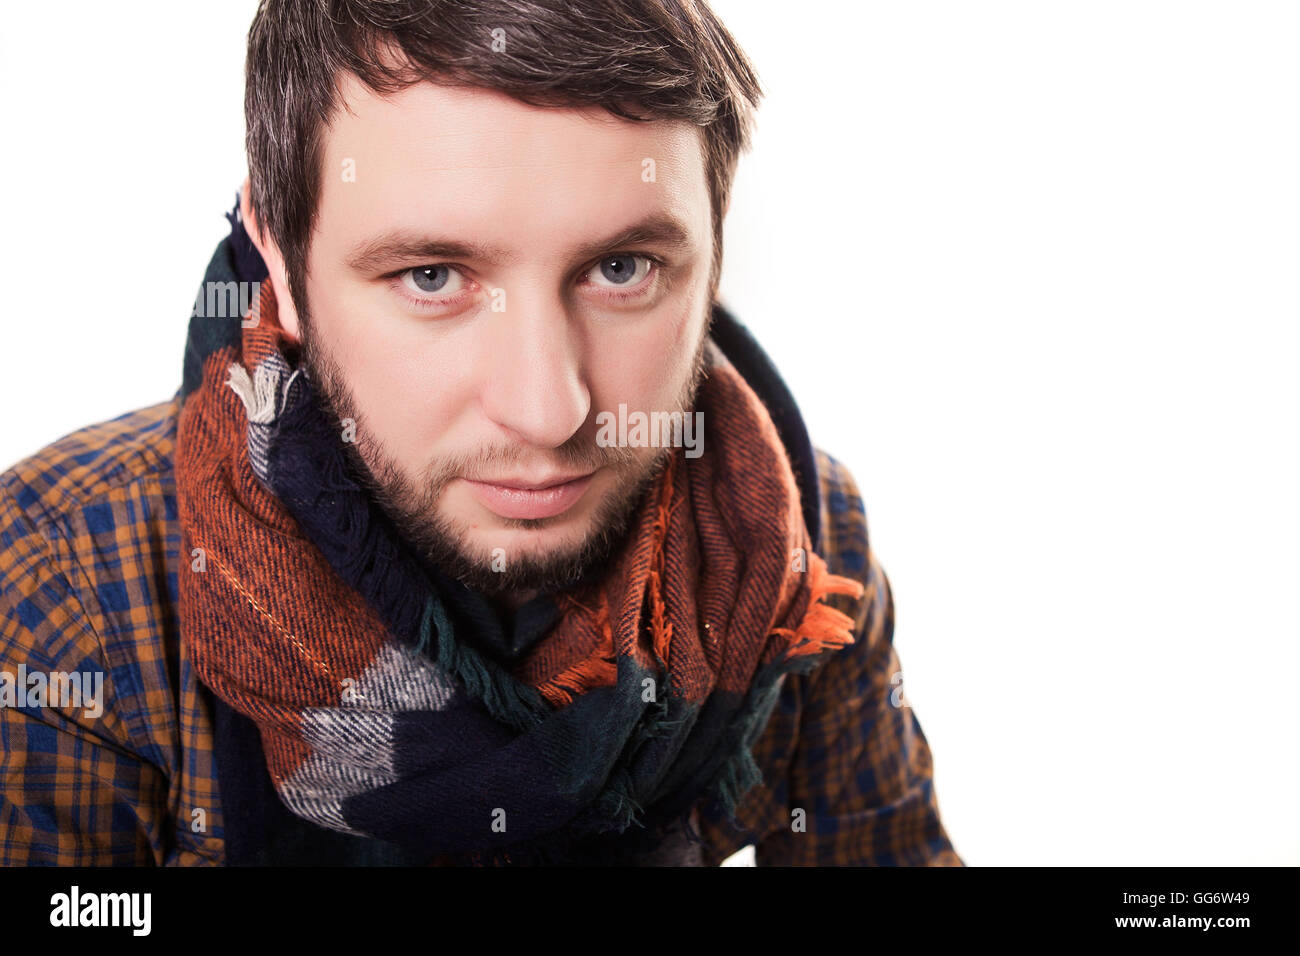 Man Cold. Ill young man with red nose, scarf, sneezing into handkerchief. Medication or drugs abuse, healthcare concept Stock Photo